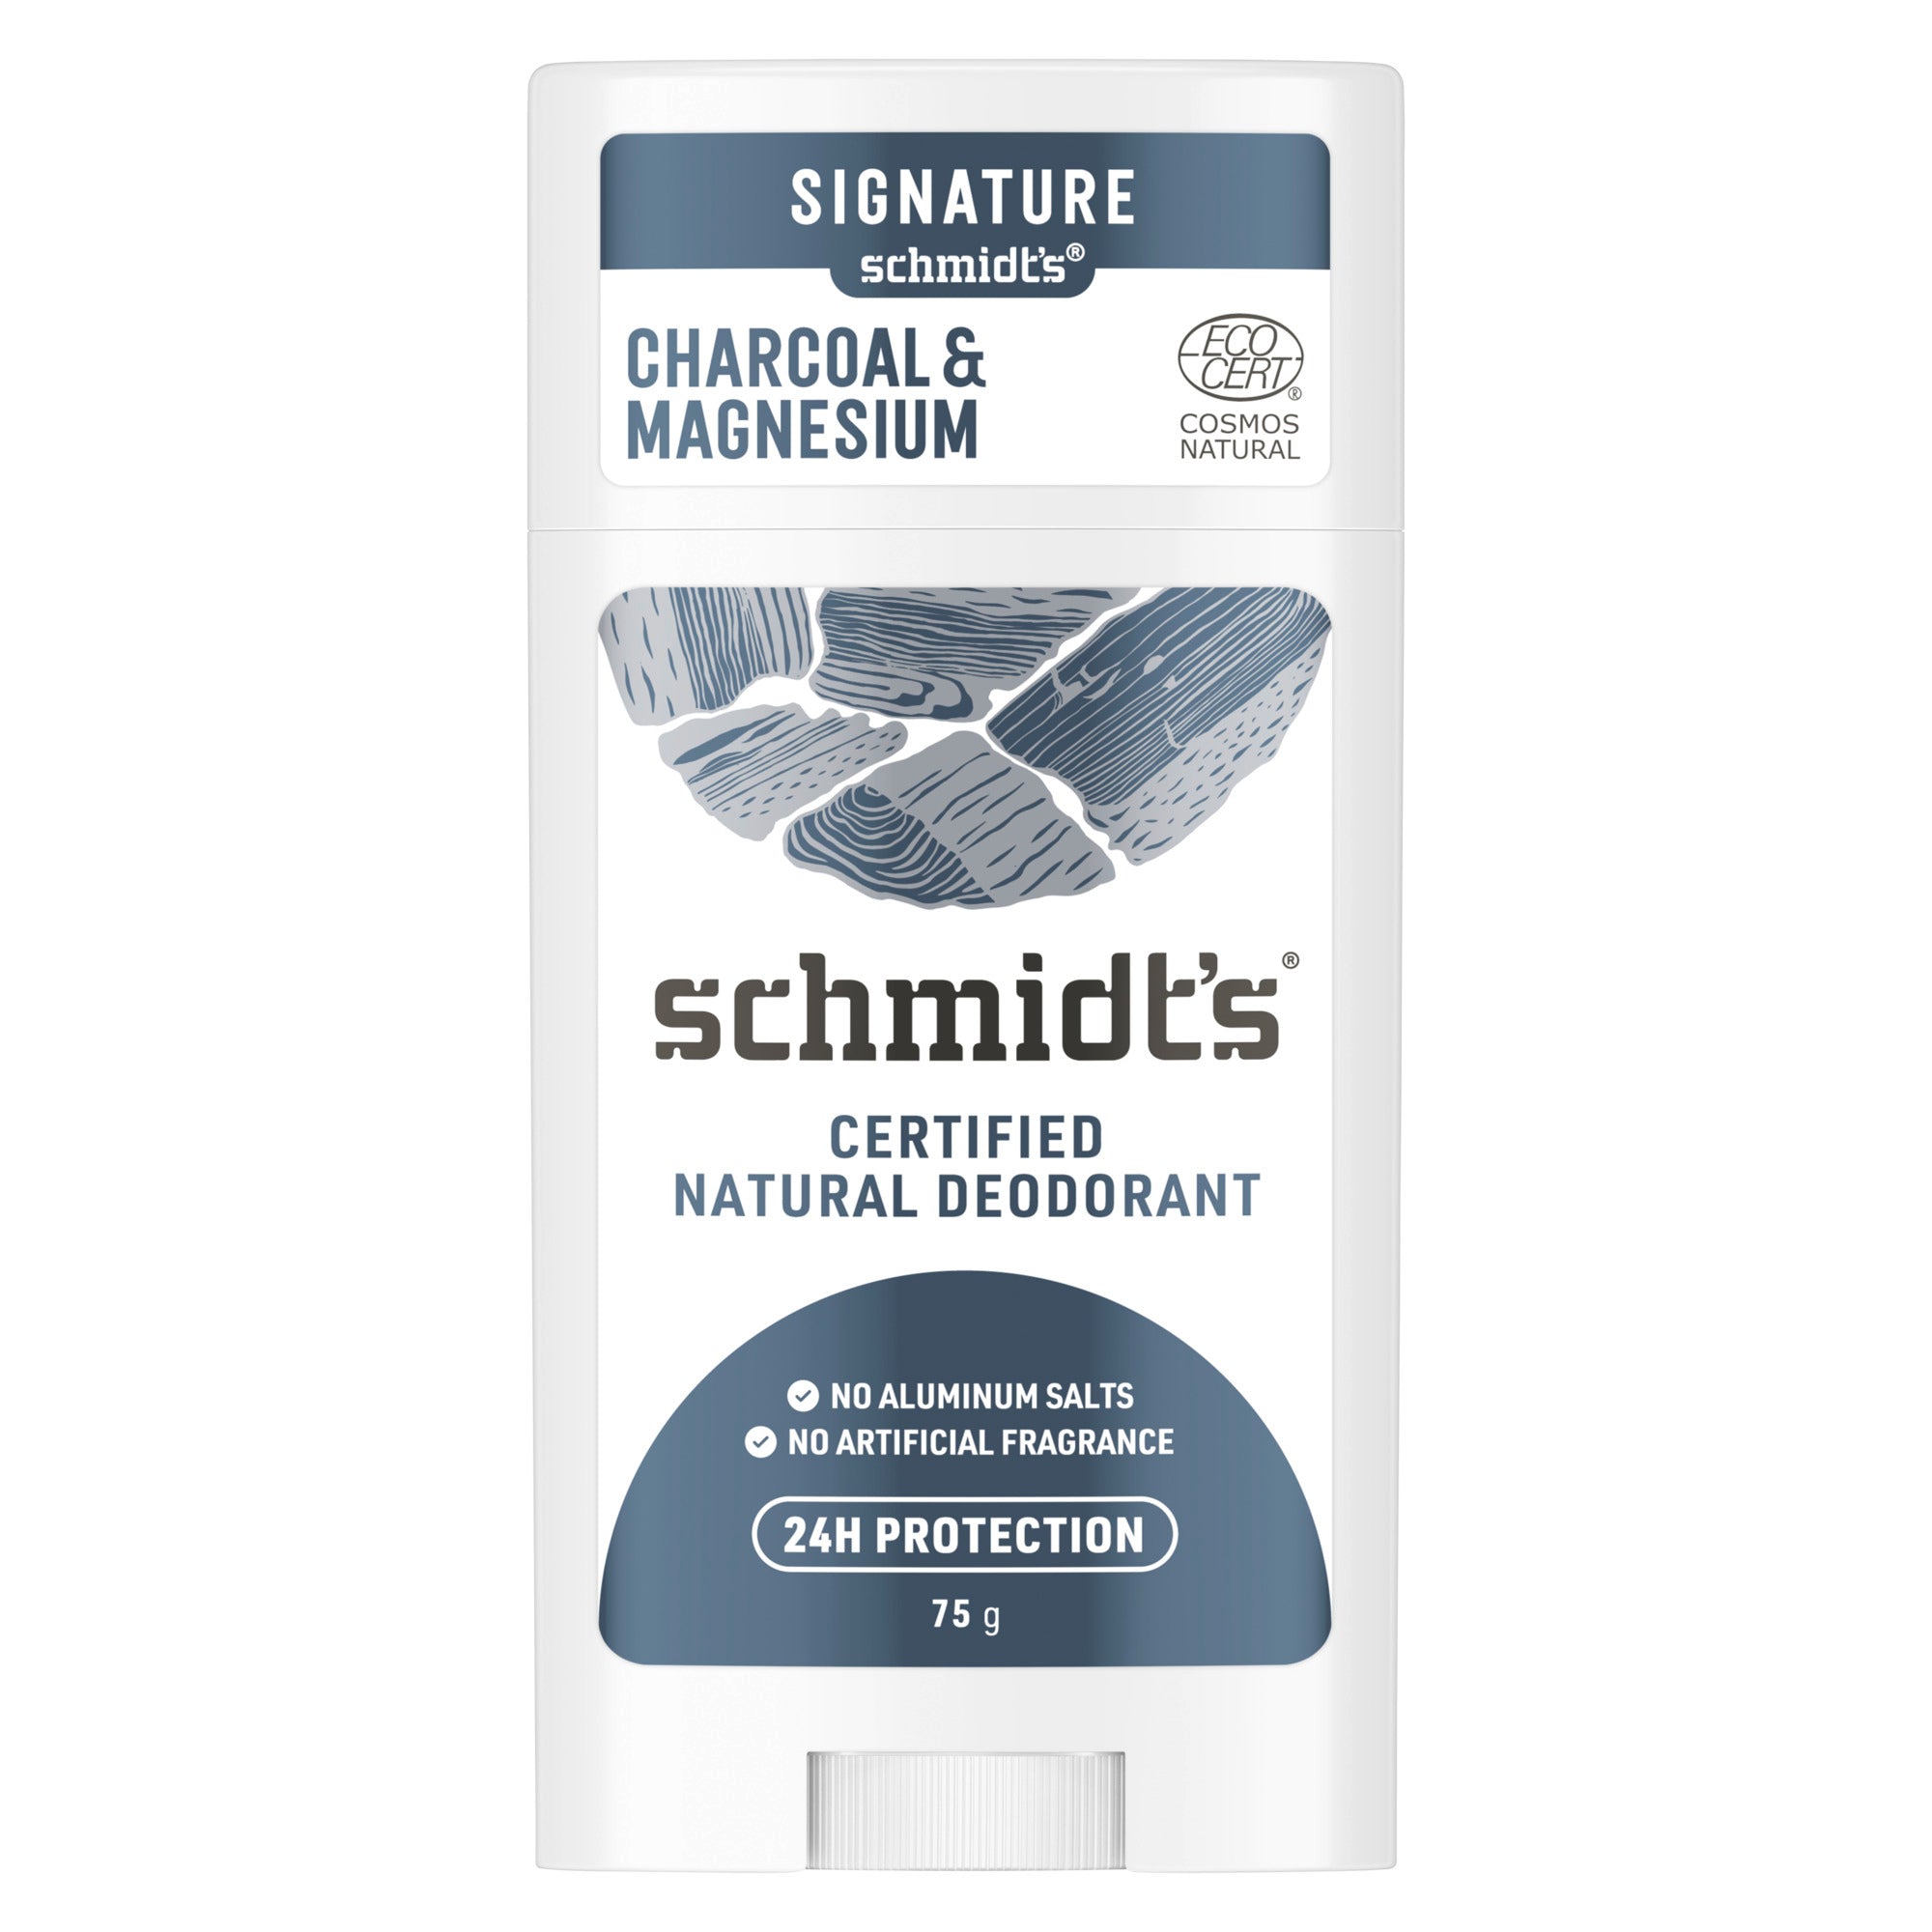 Showing the front angle view of the Schmidt's Charcoal & Magnesium Natural Deodorant 75g white and blue/grey packaging.